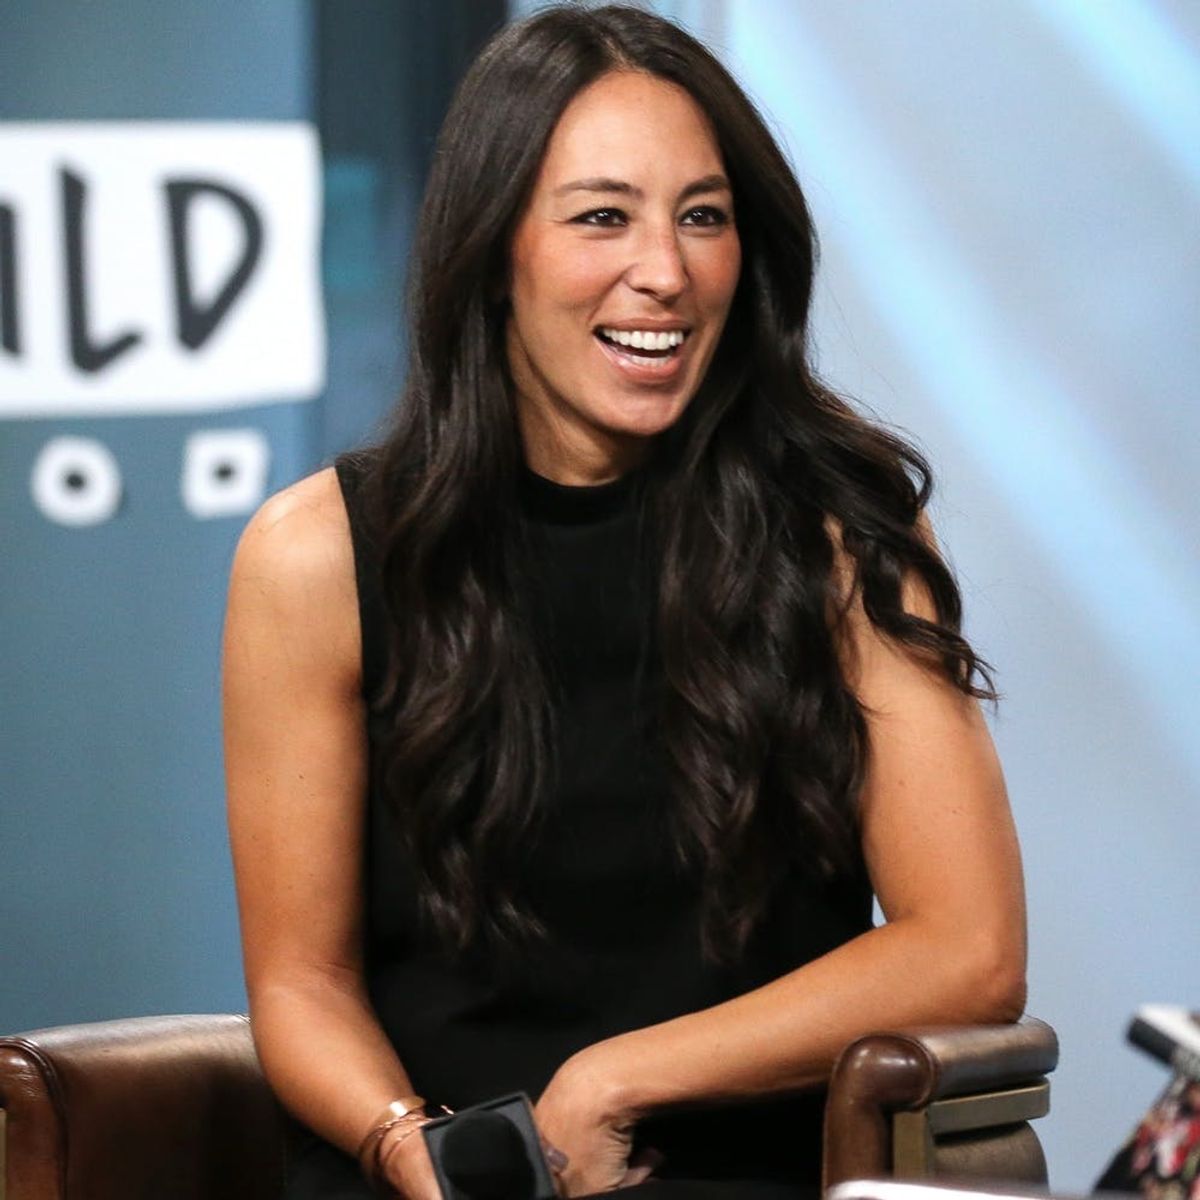 The 5 Design Tips Joanna Gaines Wants You to Know About